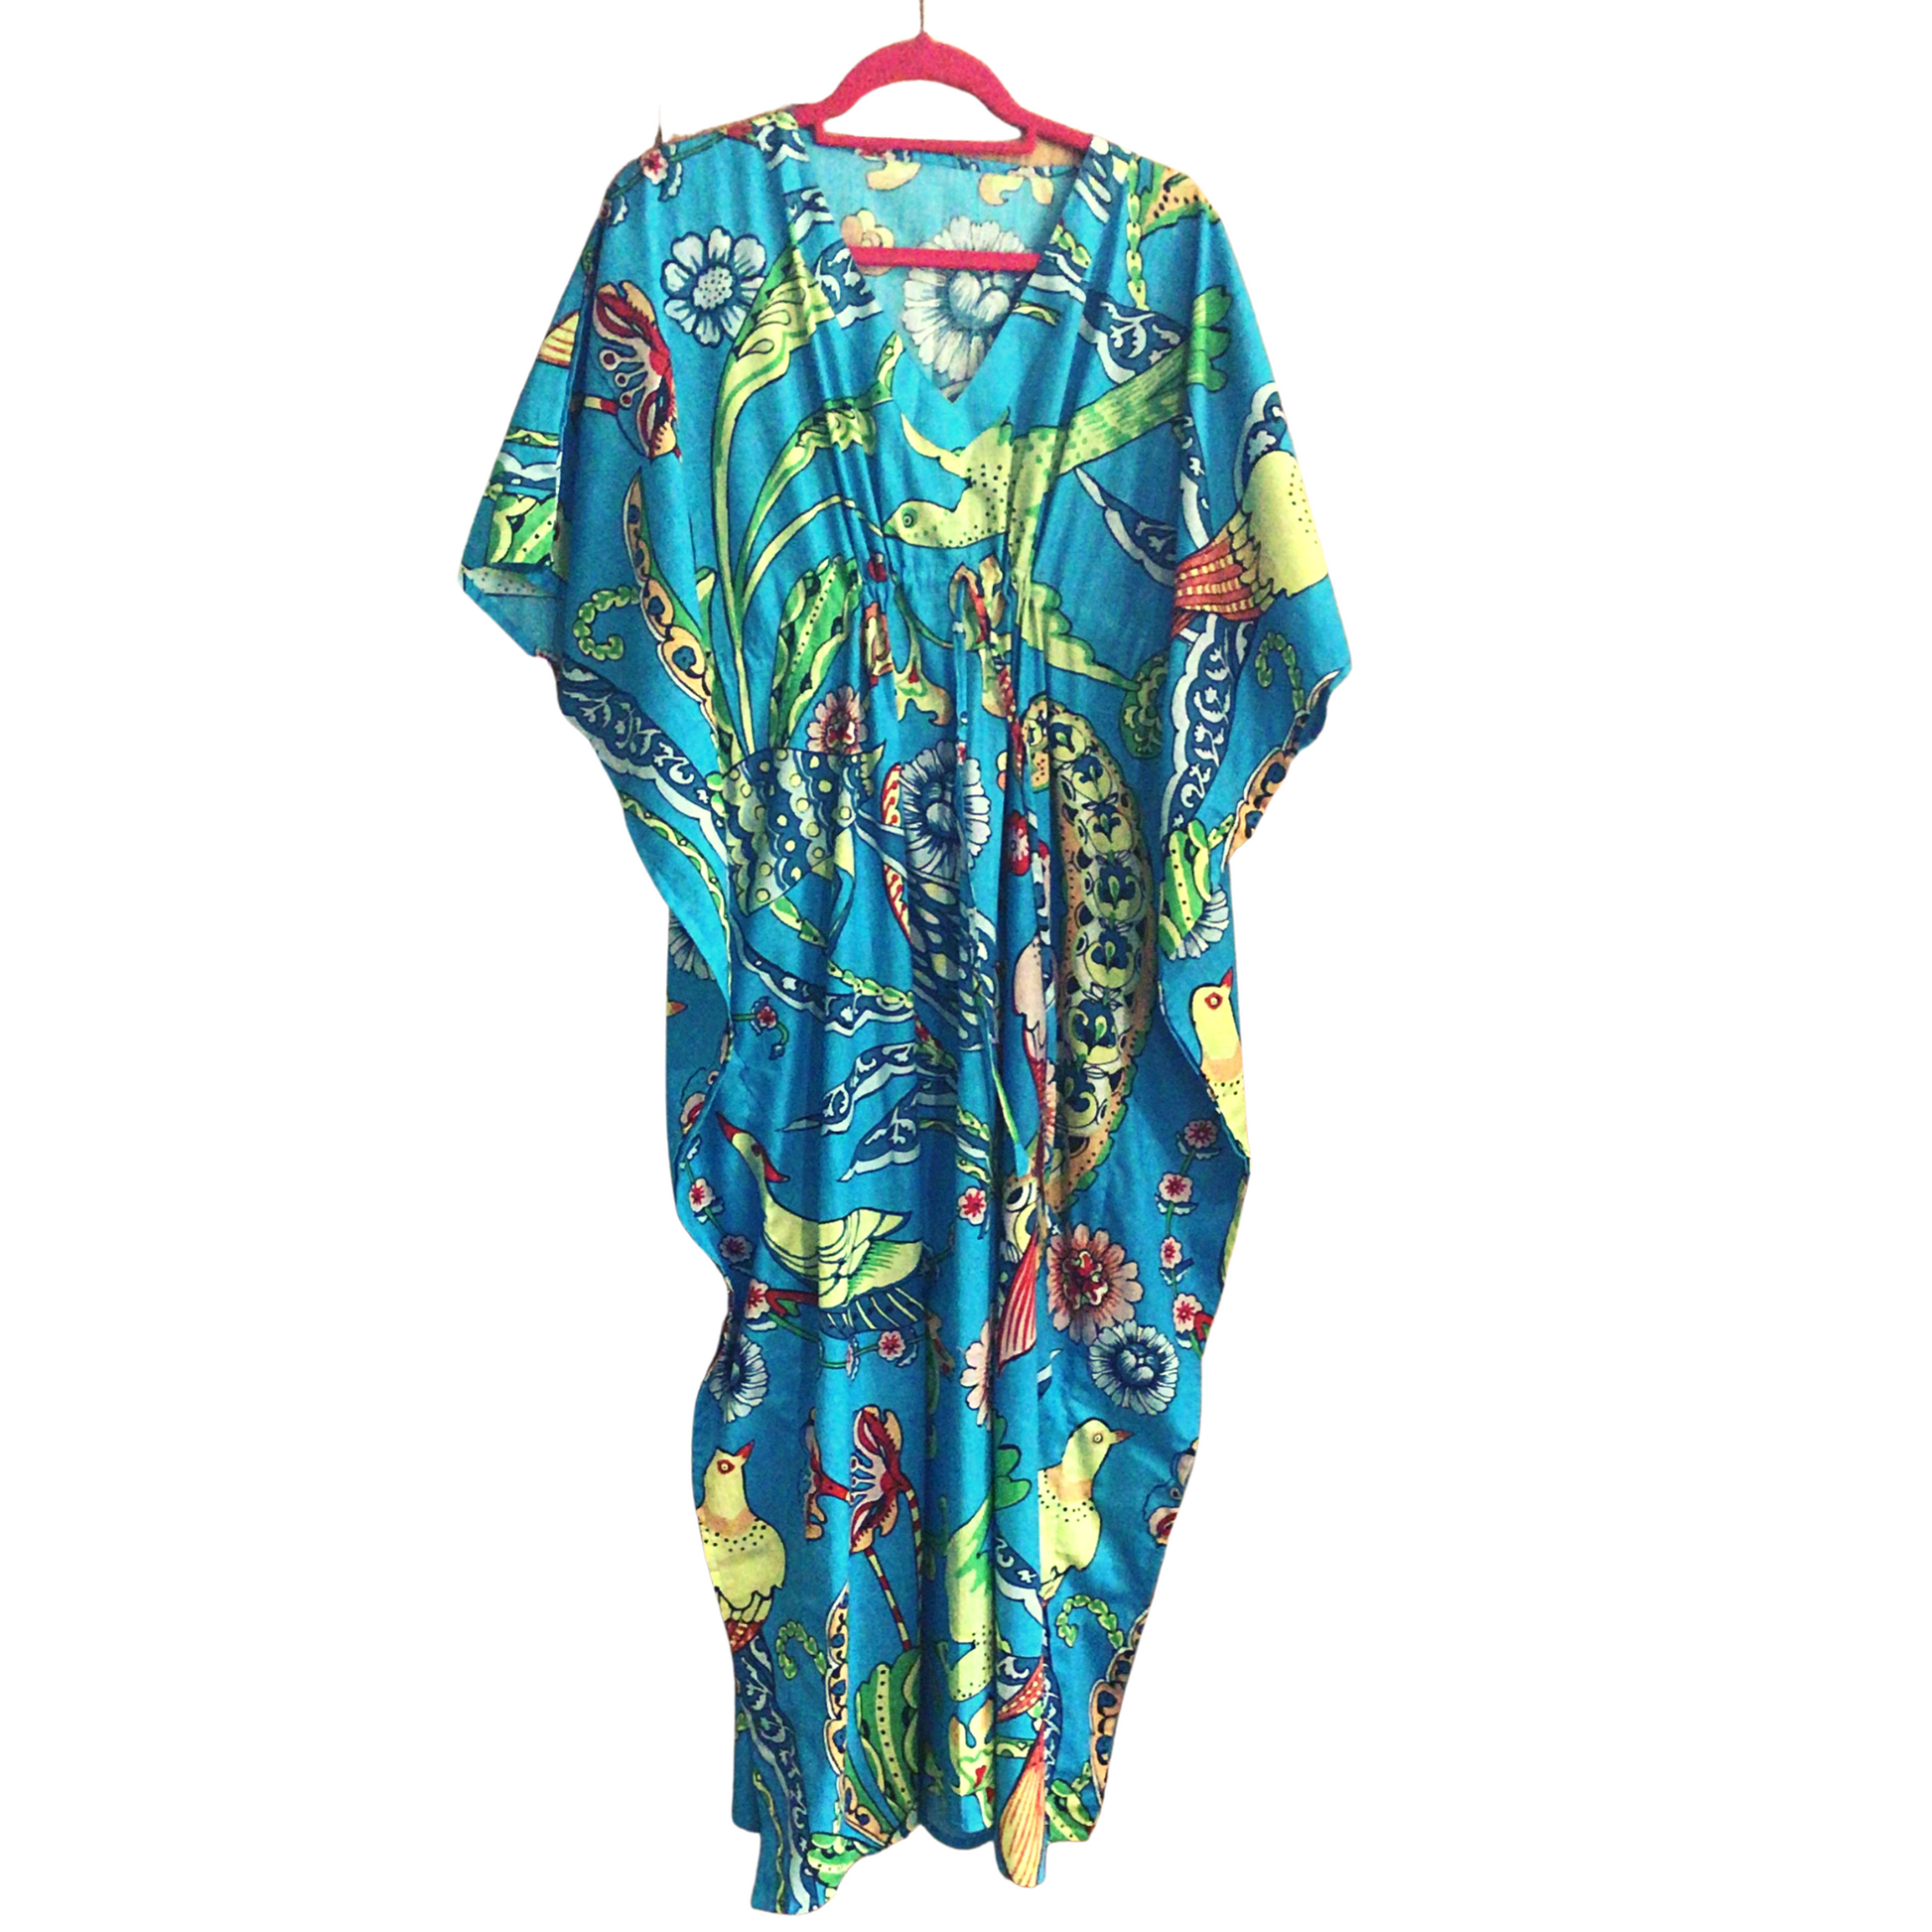 blue kaftan, floaty summer dress, relaxed dress, gorgeous blue kaftan, Vivid blue kaftan. Exotic pattern and birds from the tropics. Cool, comfortable and sophisticated style. Ideal for summer days and lounging around the house or in the garden. 100% cotton